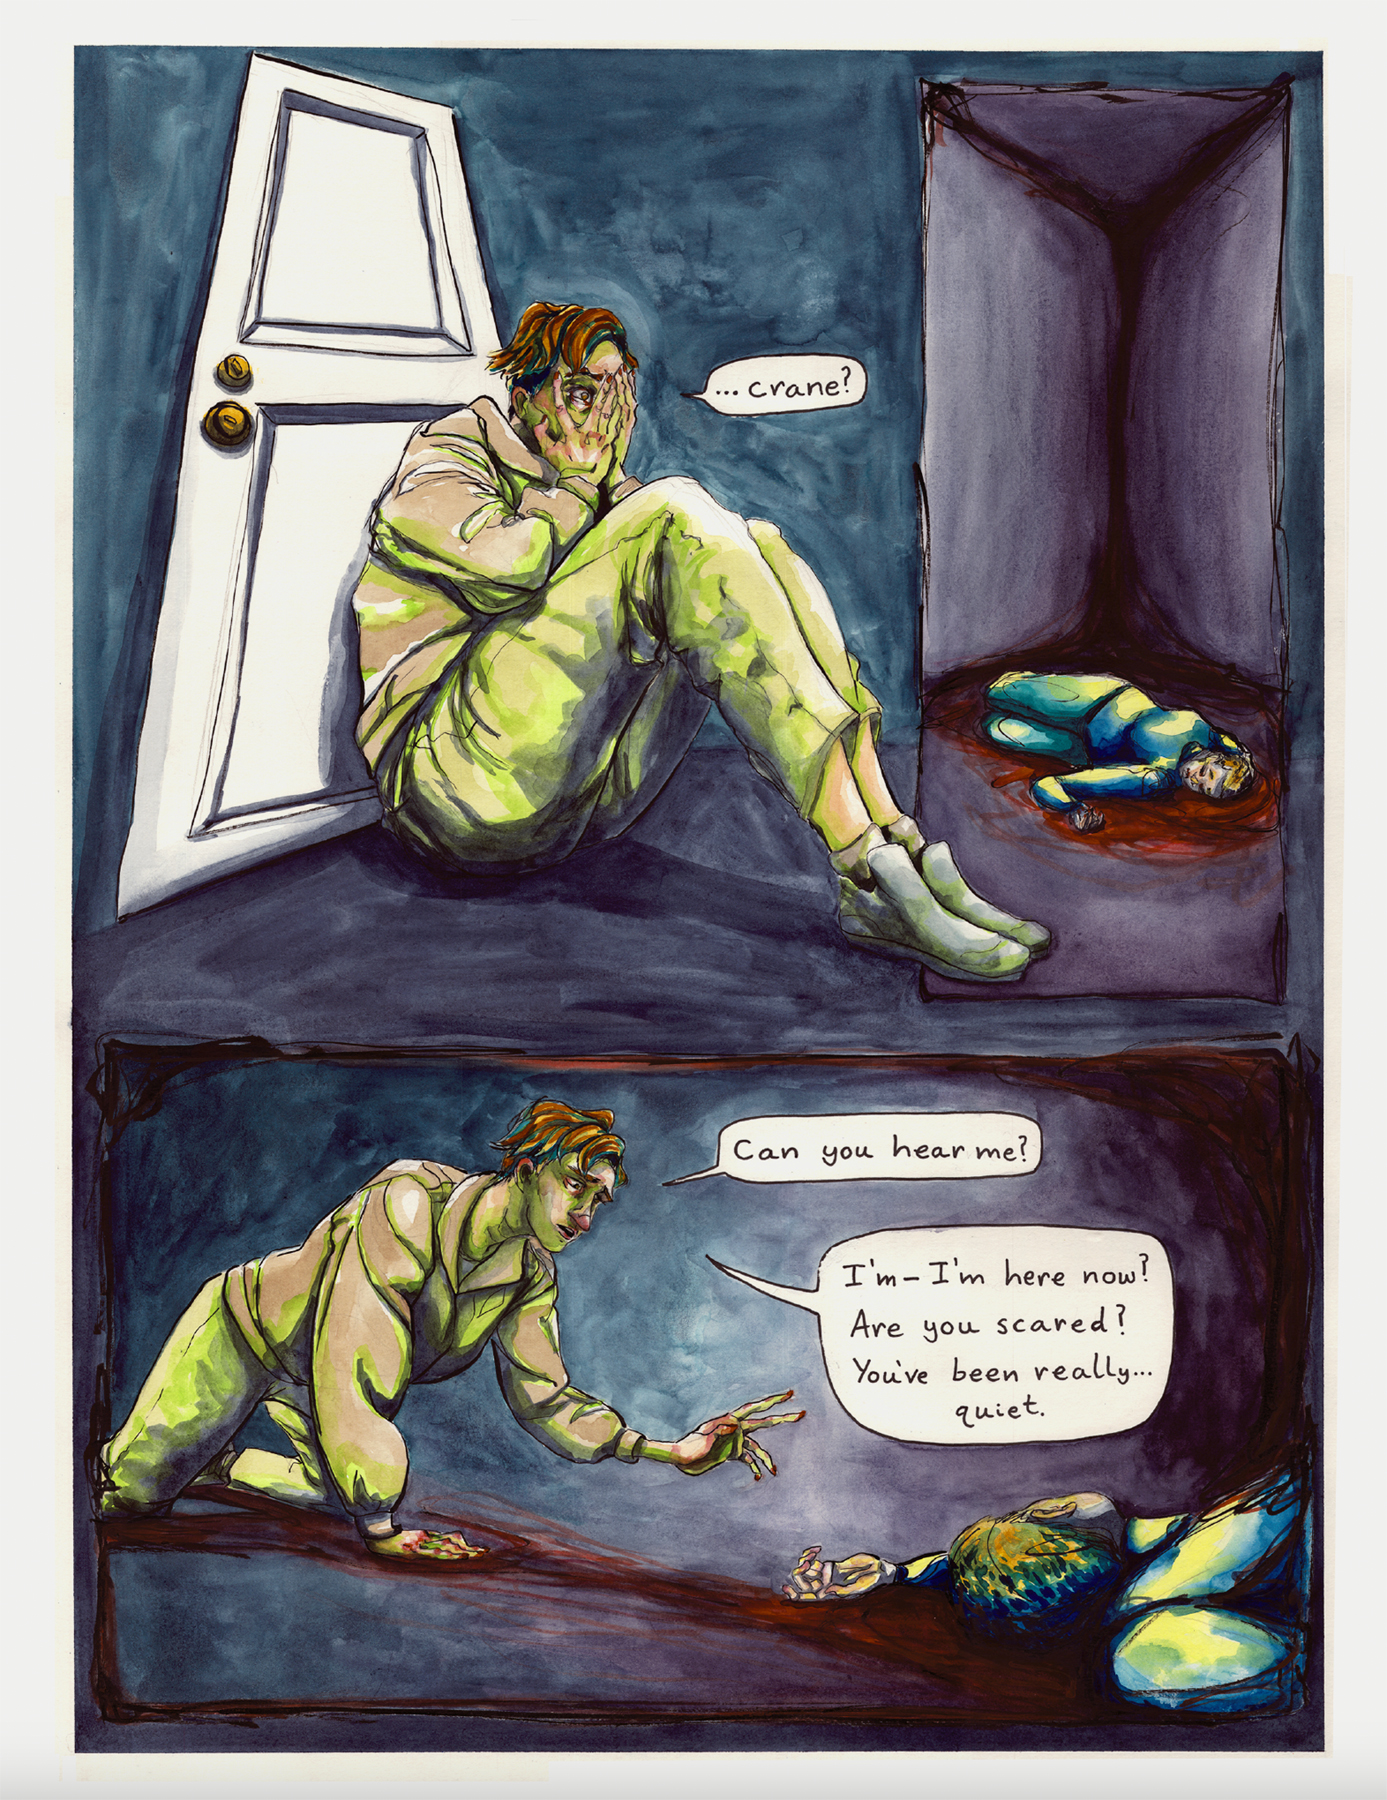 comic page from Against the Floor. Killlian approaches Crane who is still lying on the floor. Image courtesy of Daniell Stromanthe